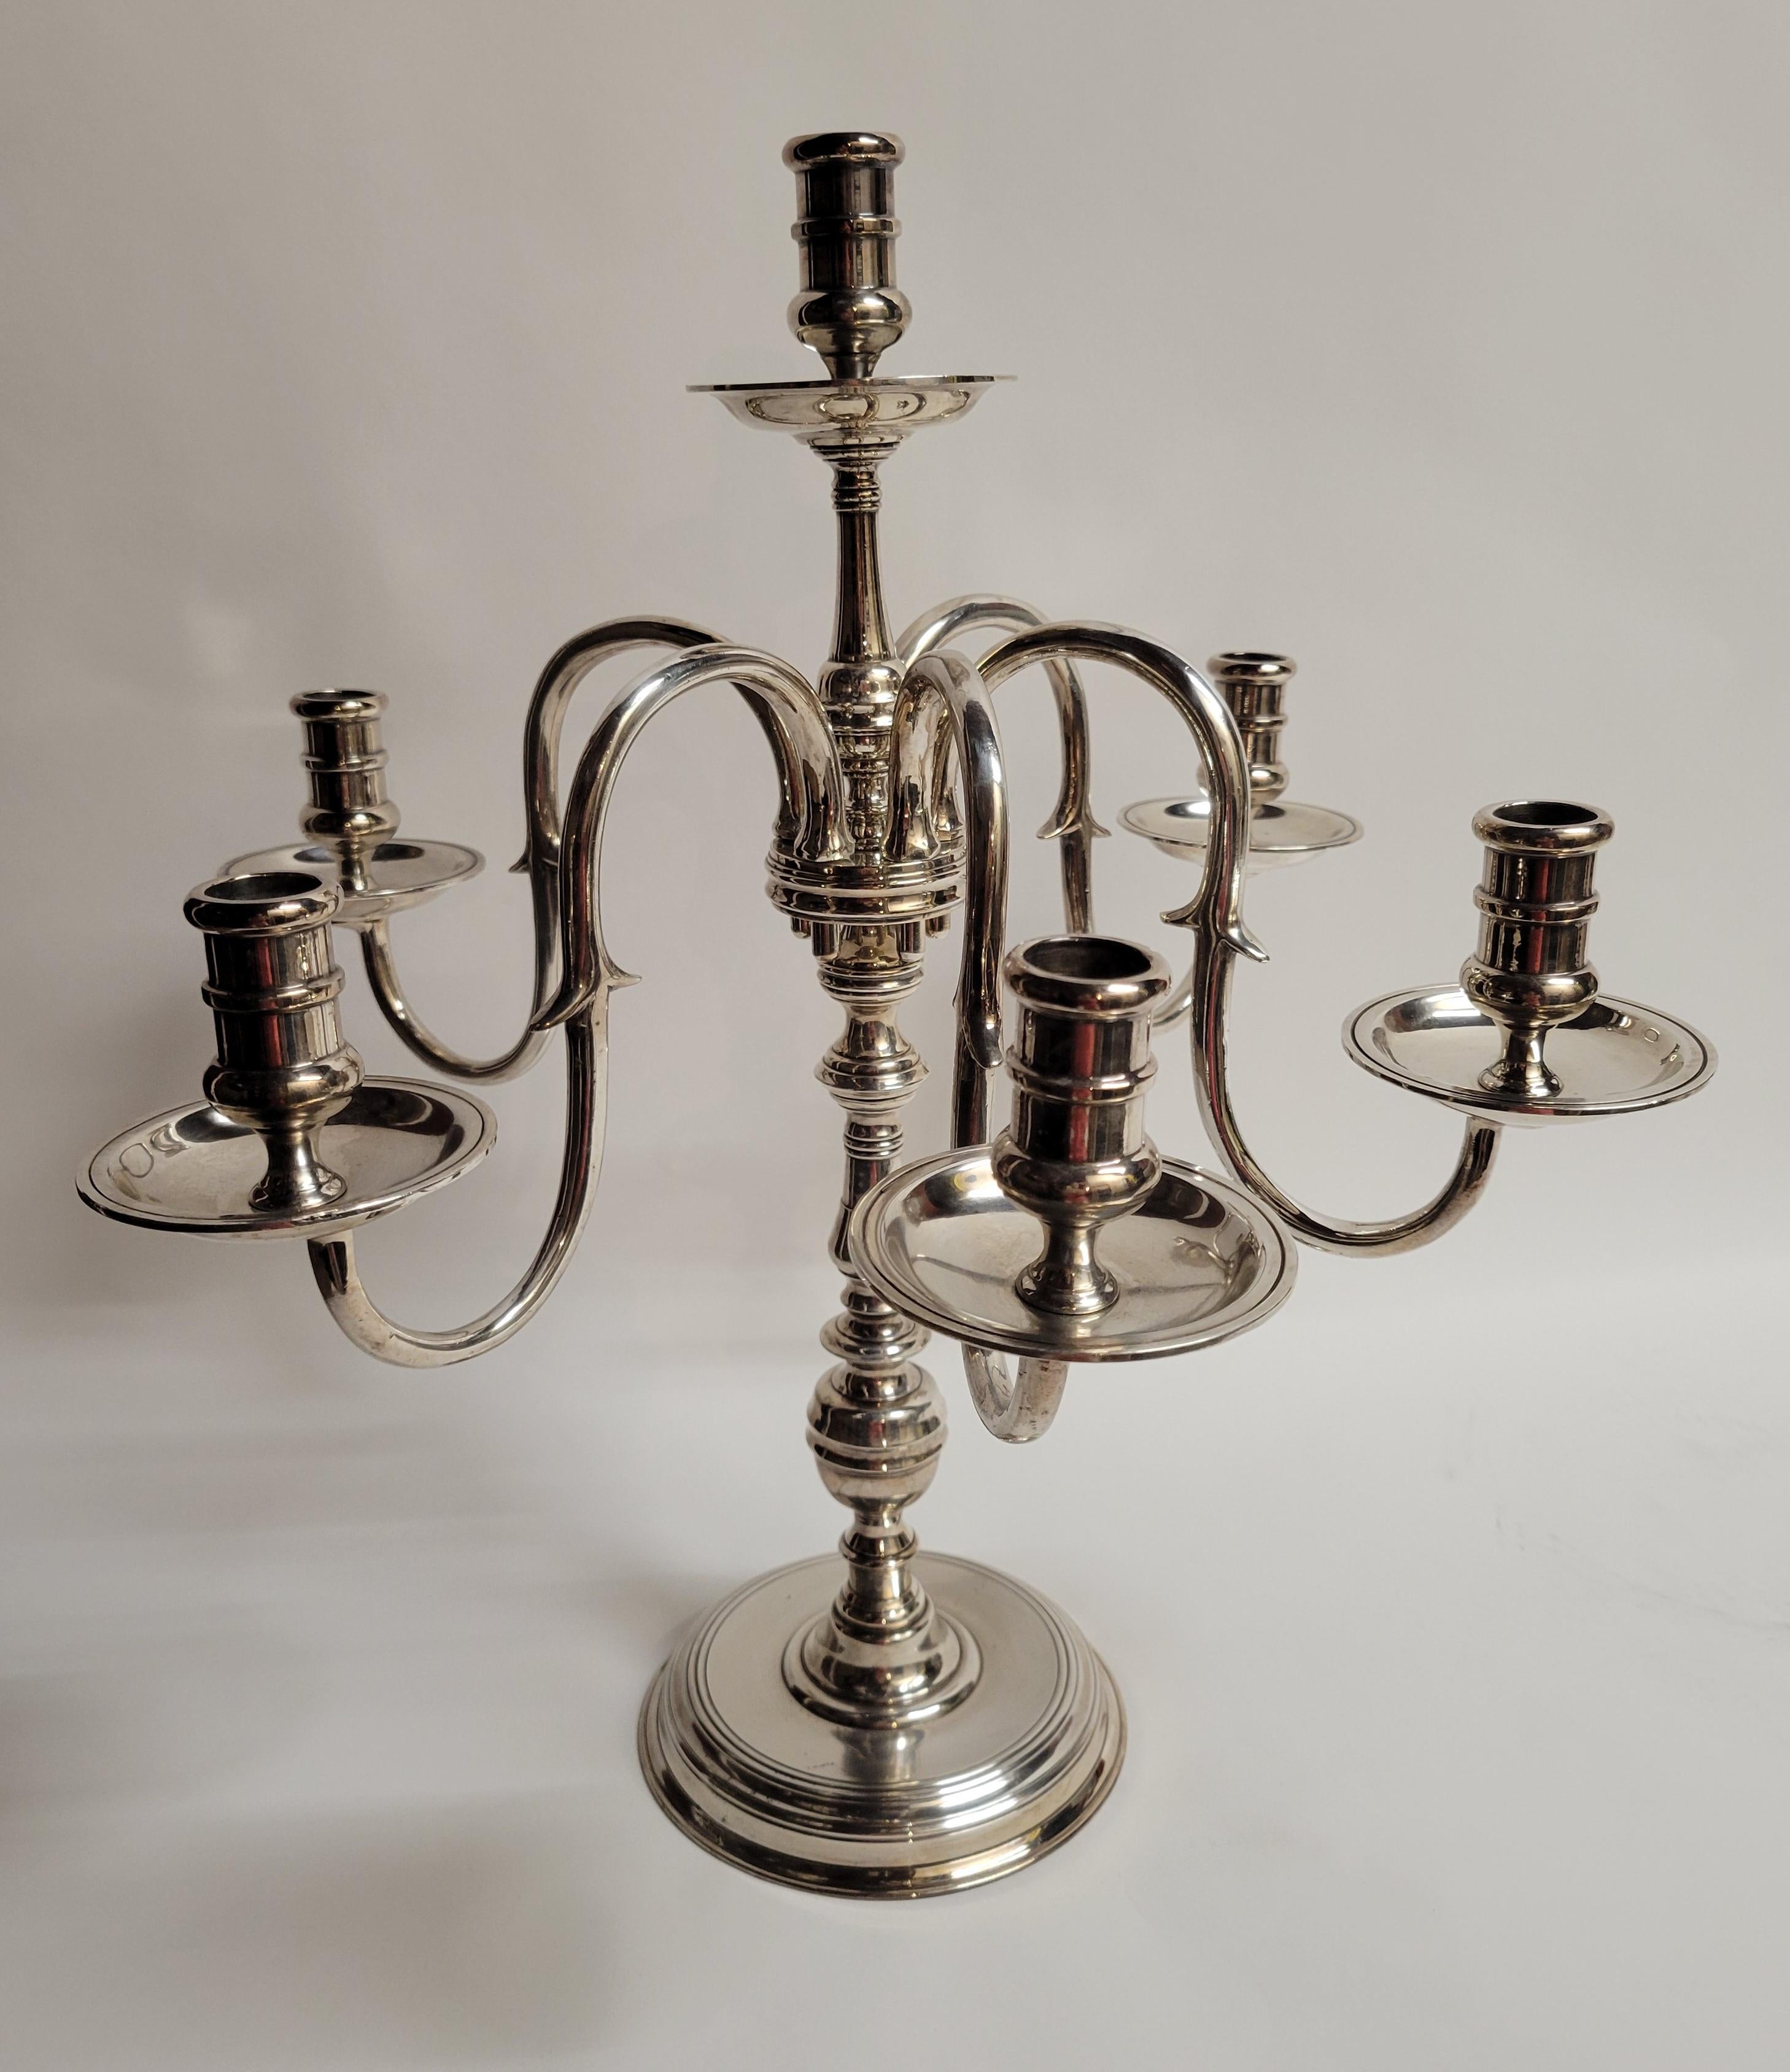 A handsome pair of 5 arm candelabra. Classic lines that would work in any situation.